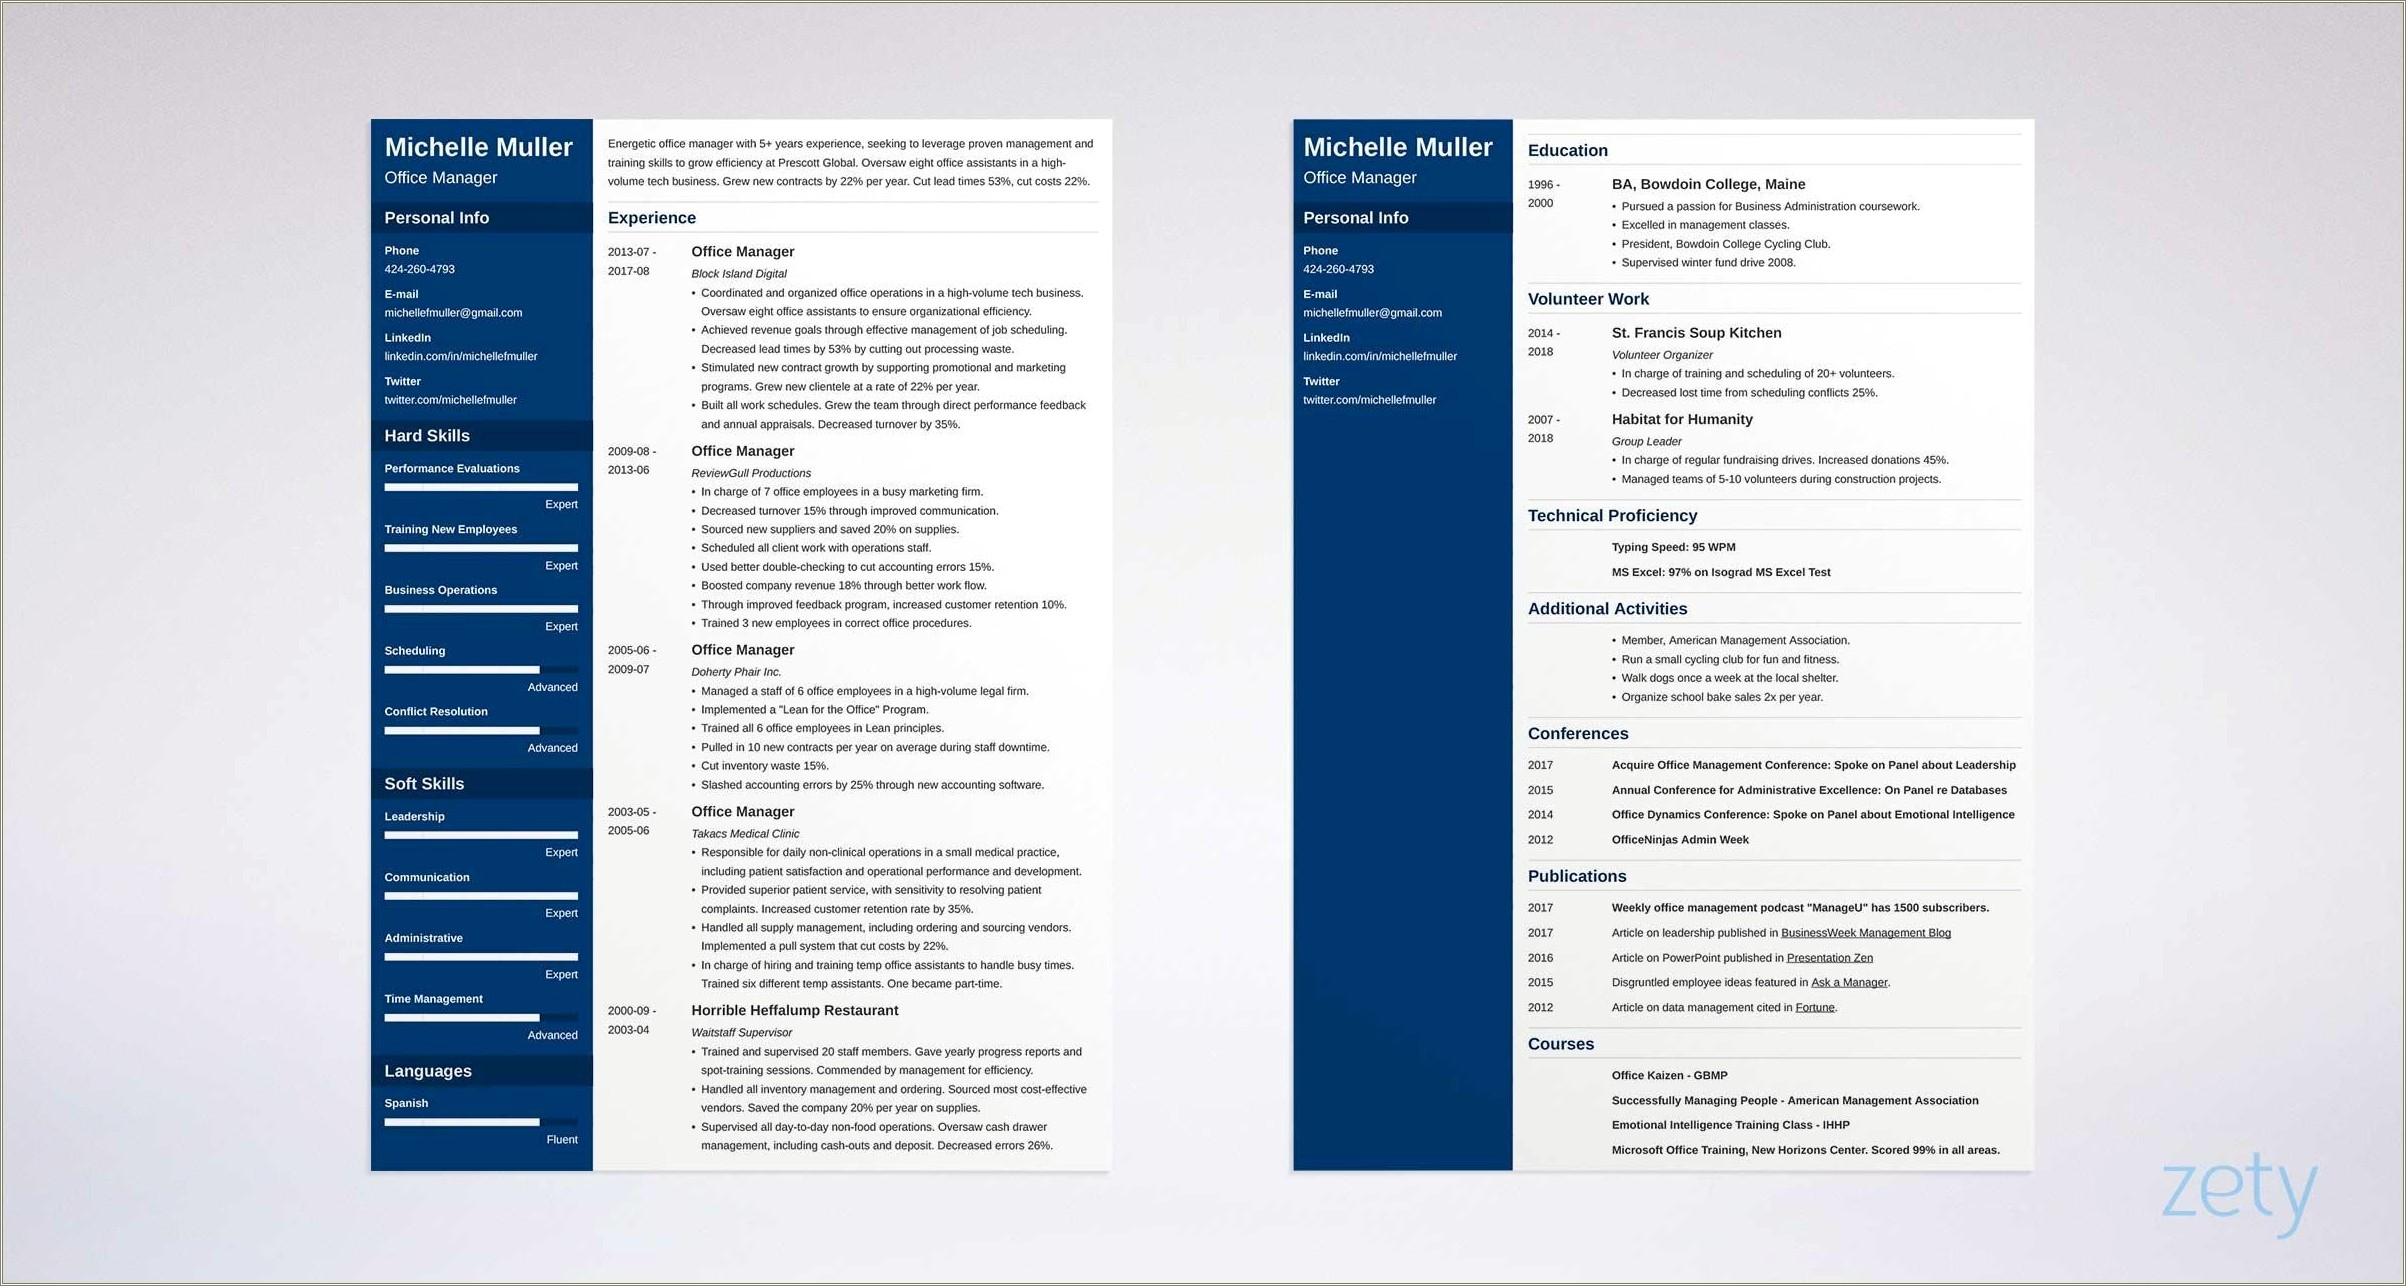 2 Page Resume Good Or Bad